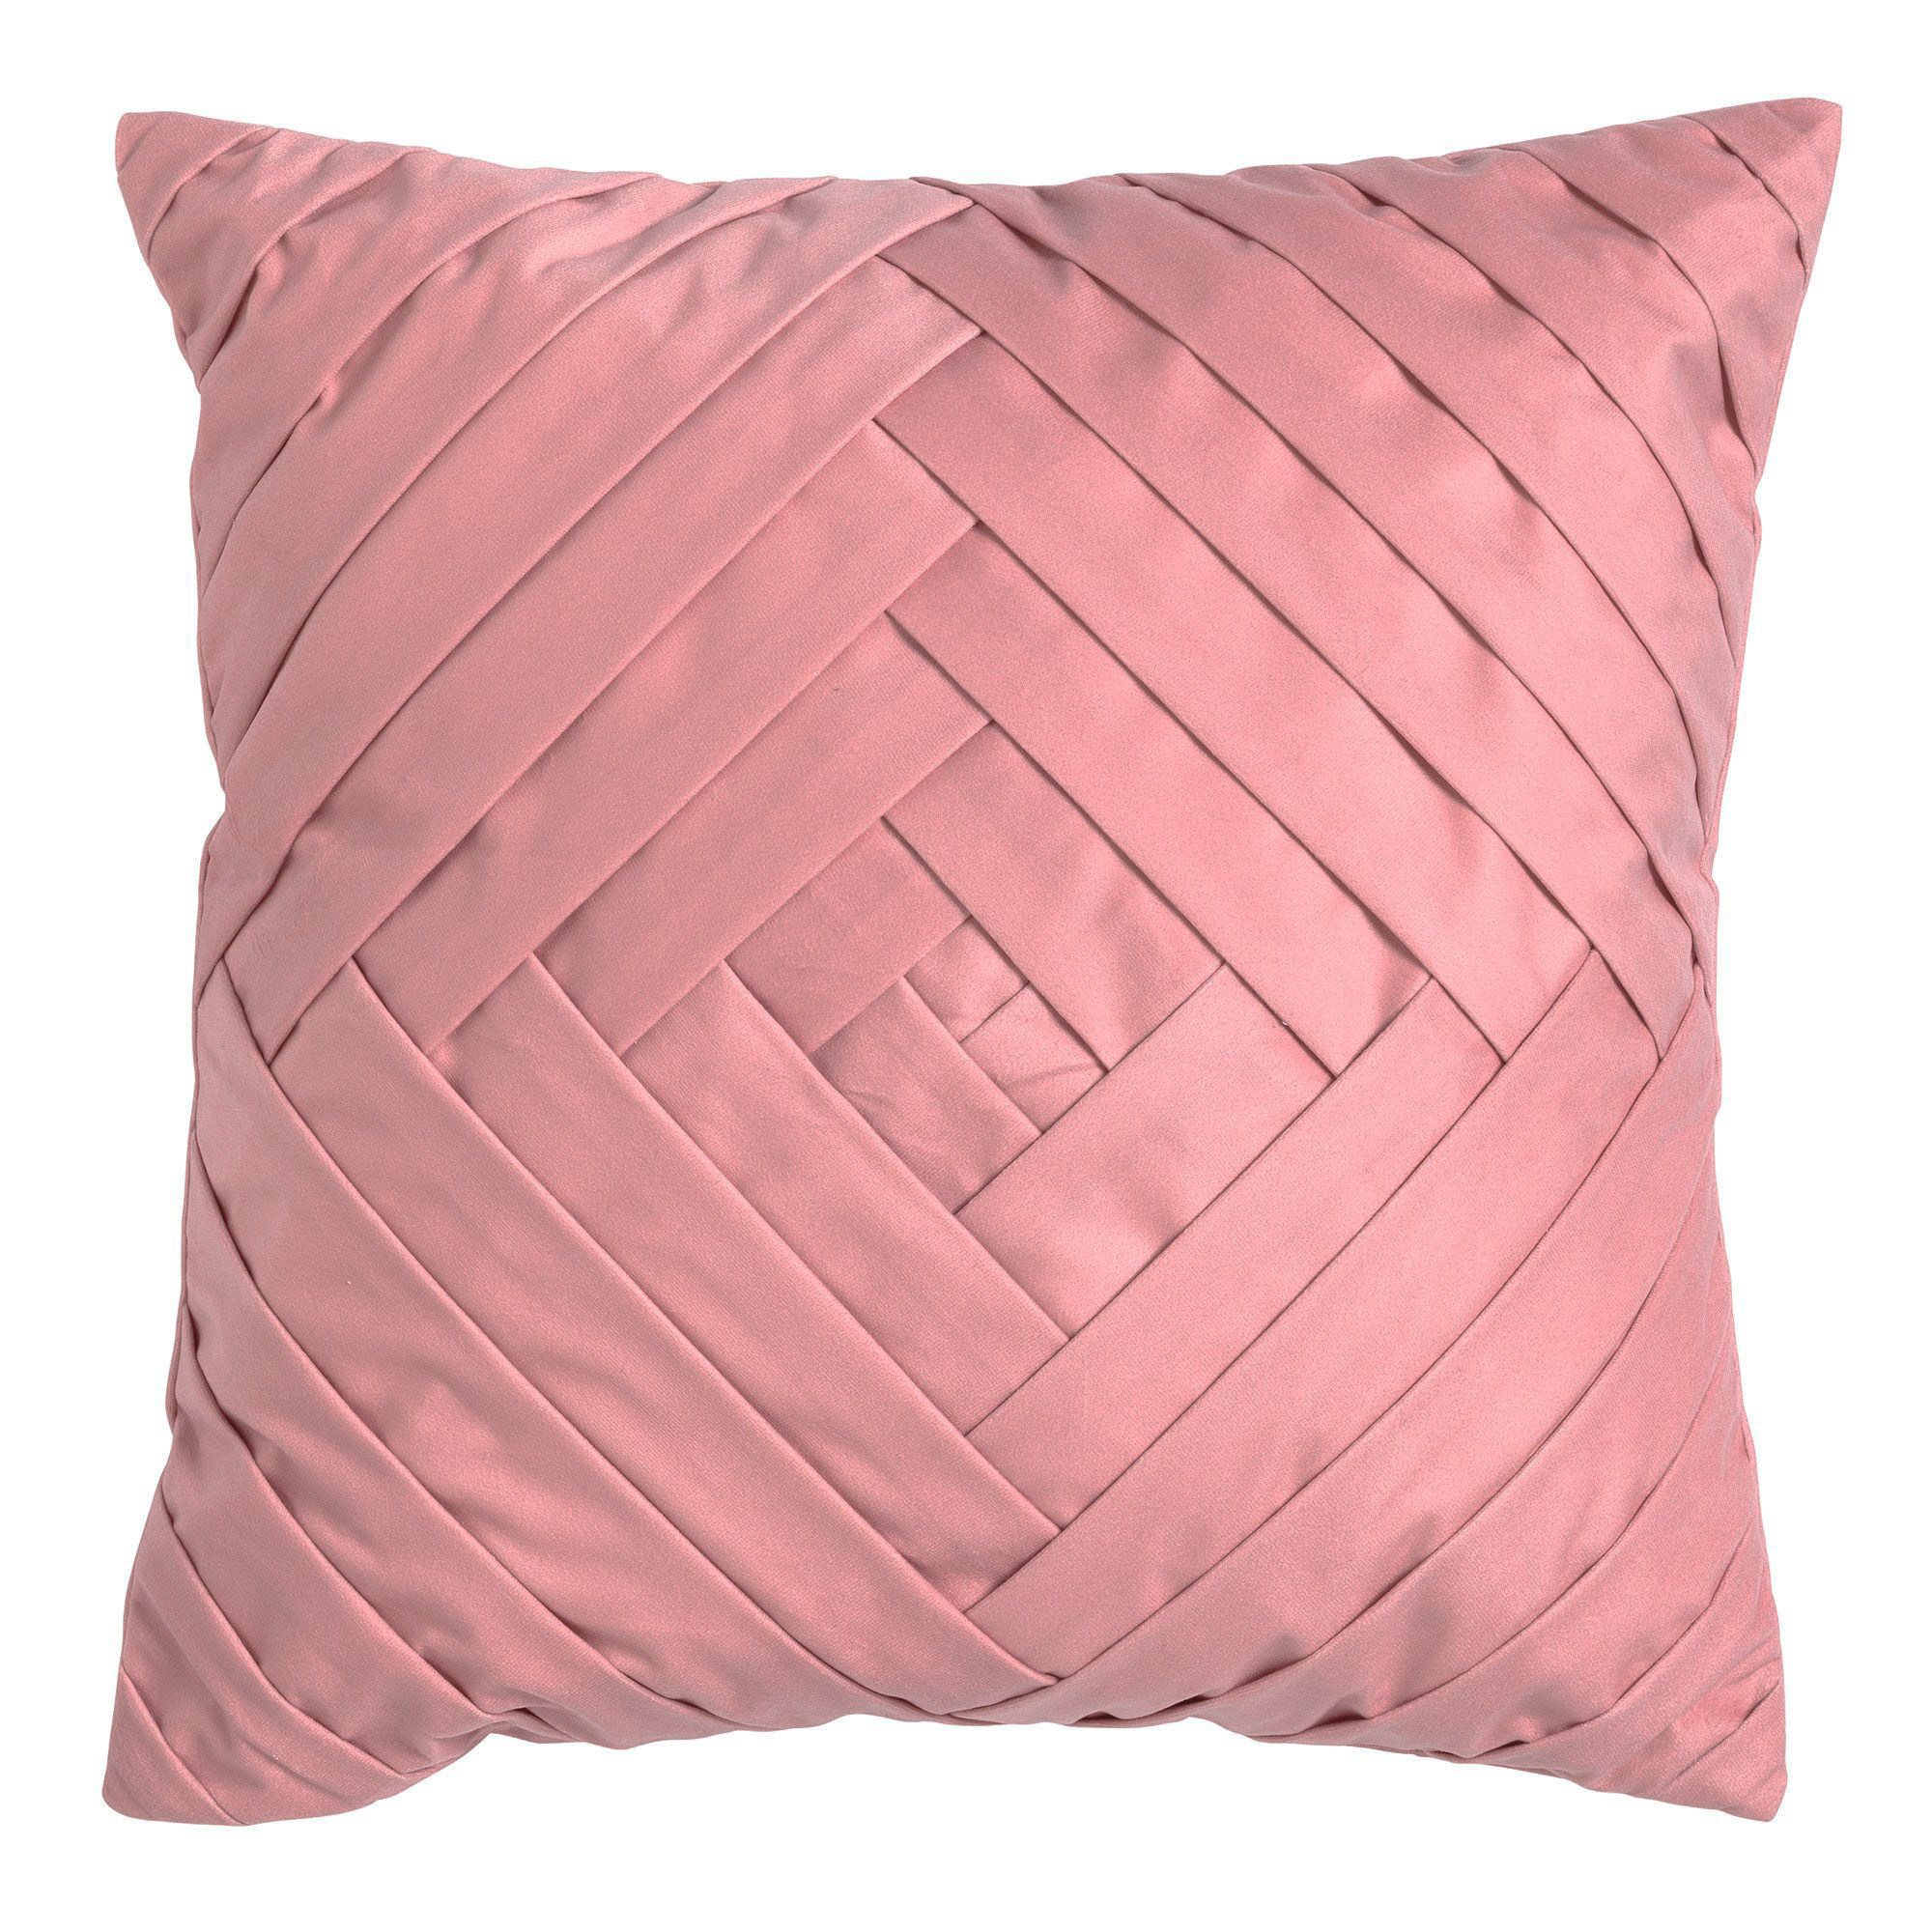 PHILLY - Cushion cover 45x45 cm Dusty Rose - pink